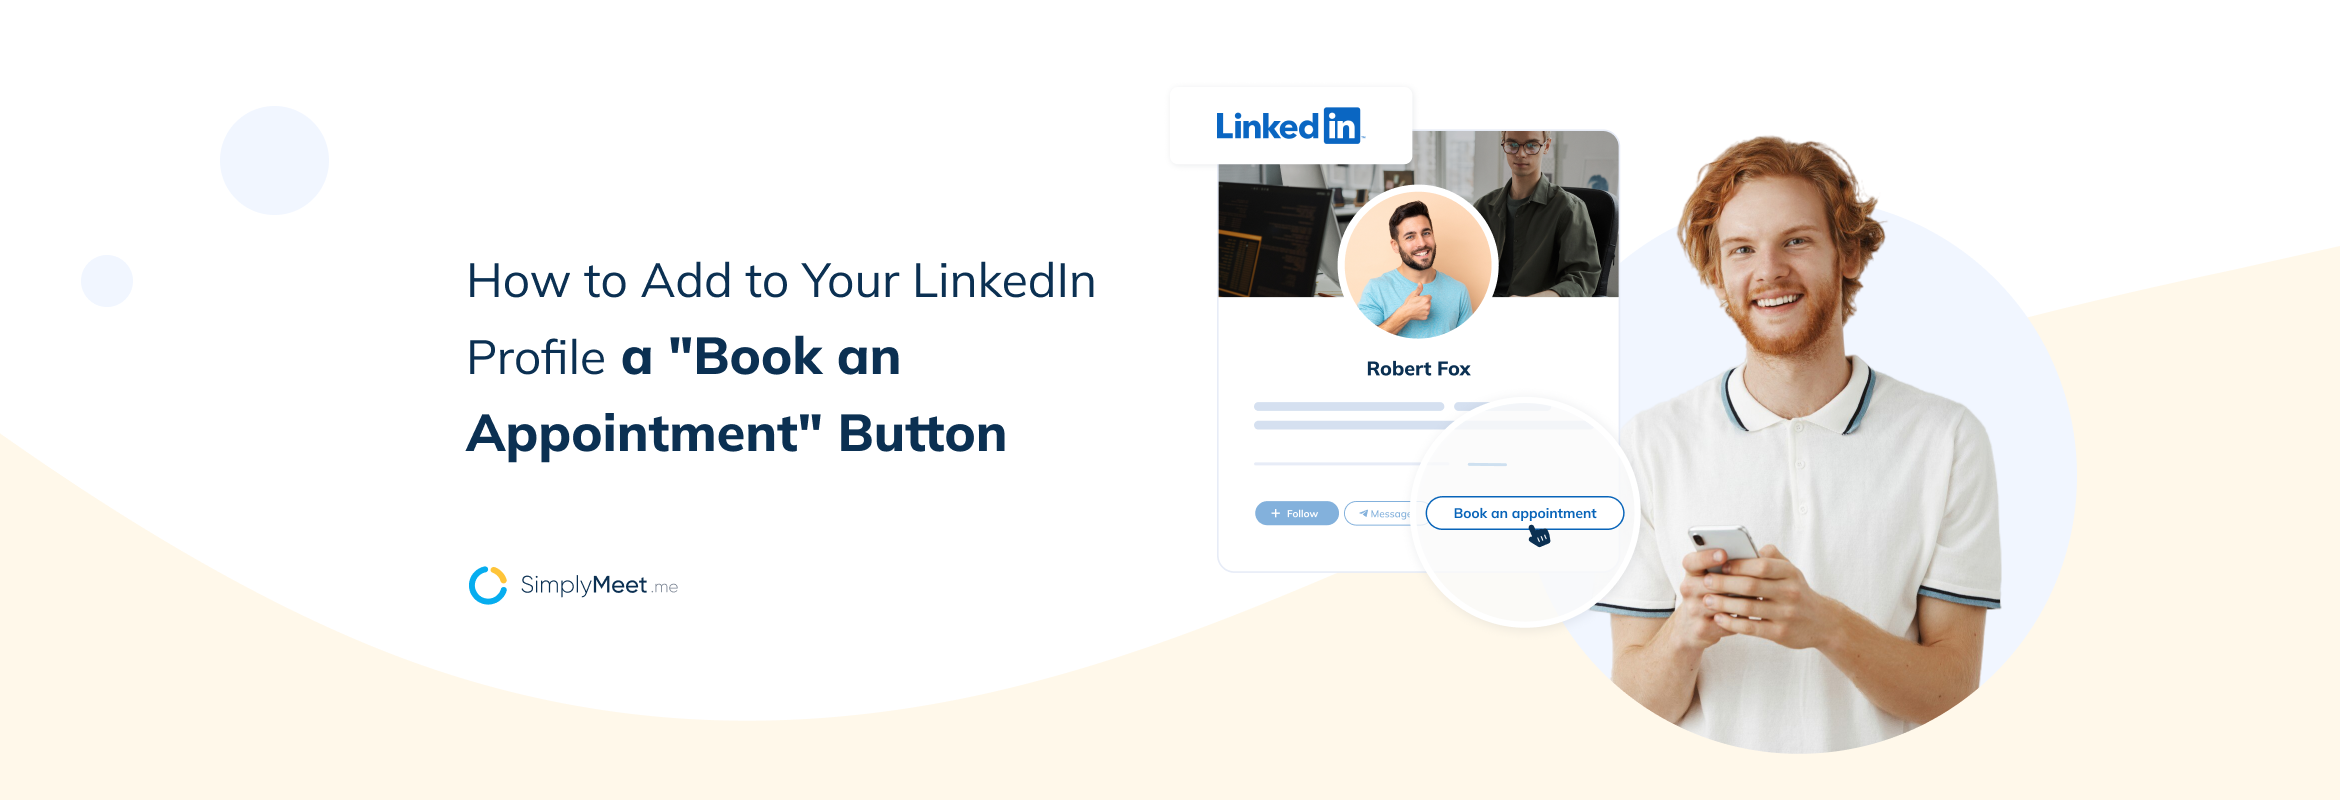 How to Add to Your LinkedIn Profile Book a meeting